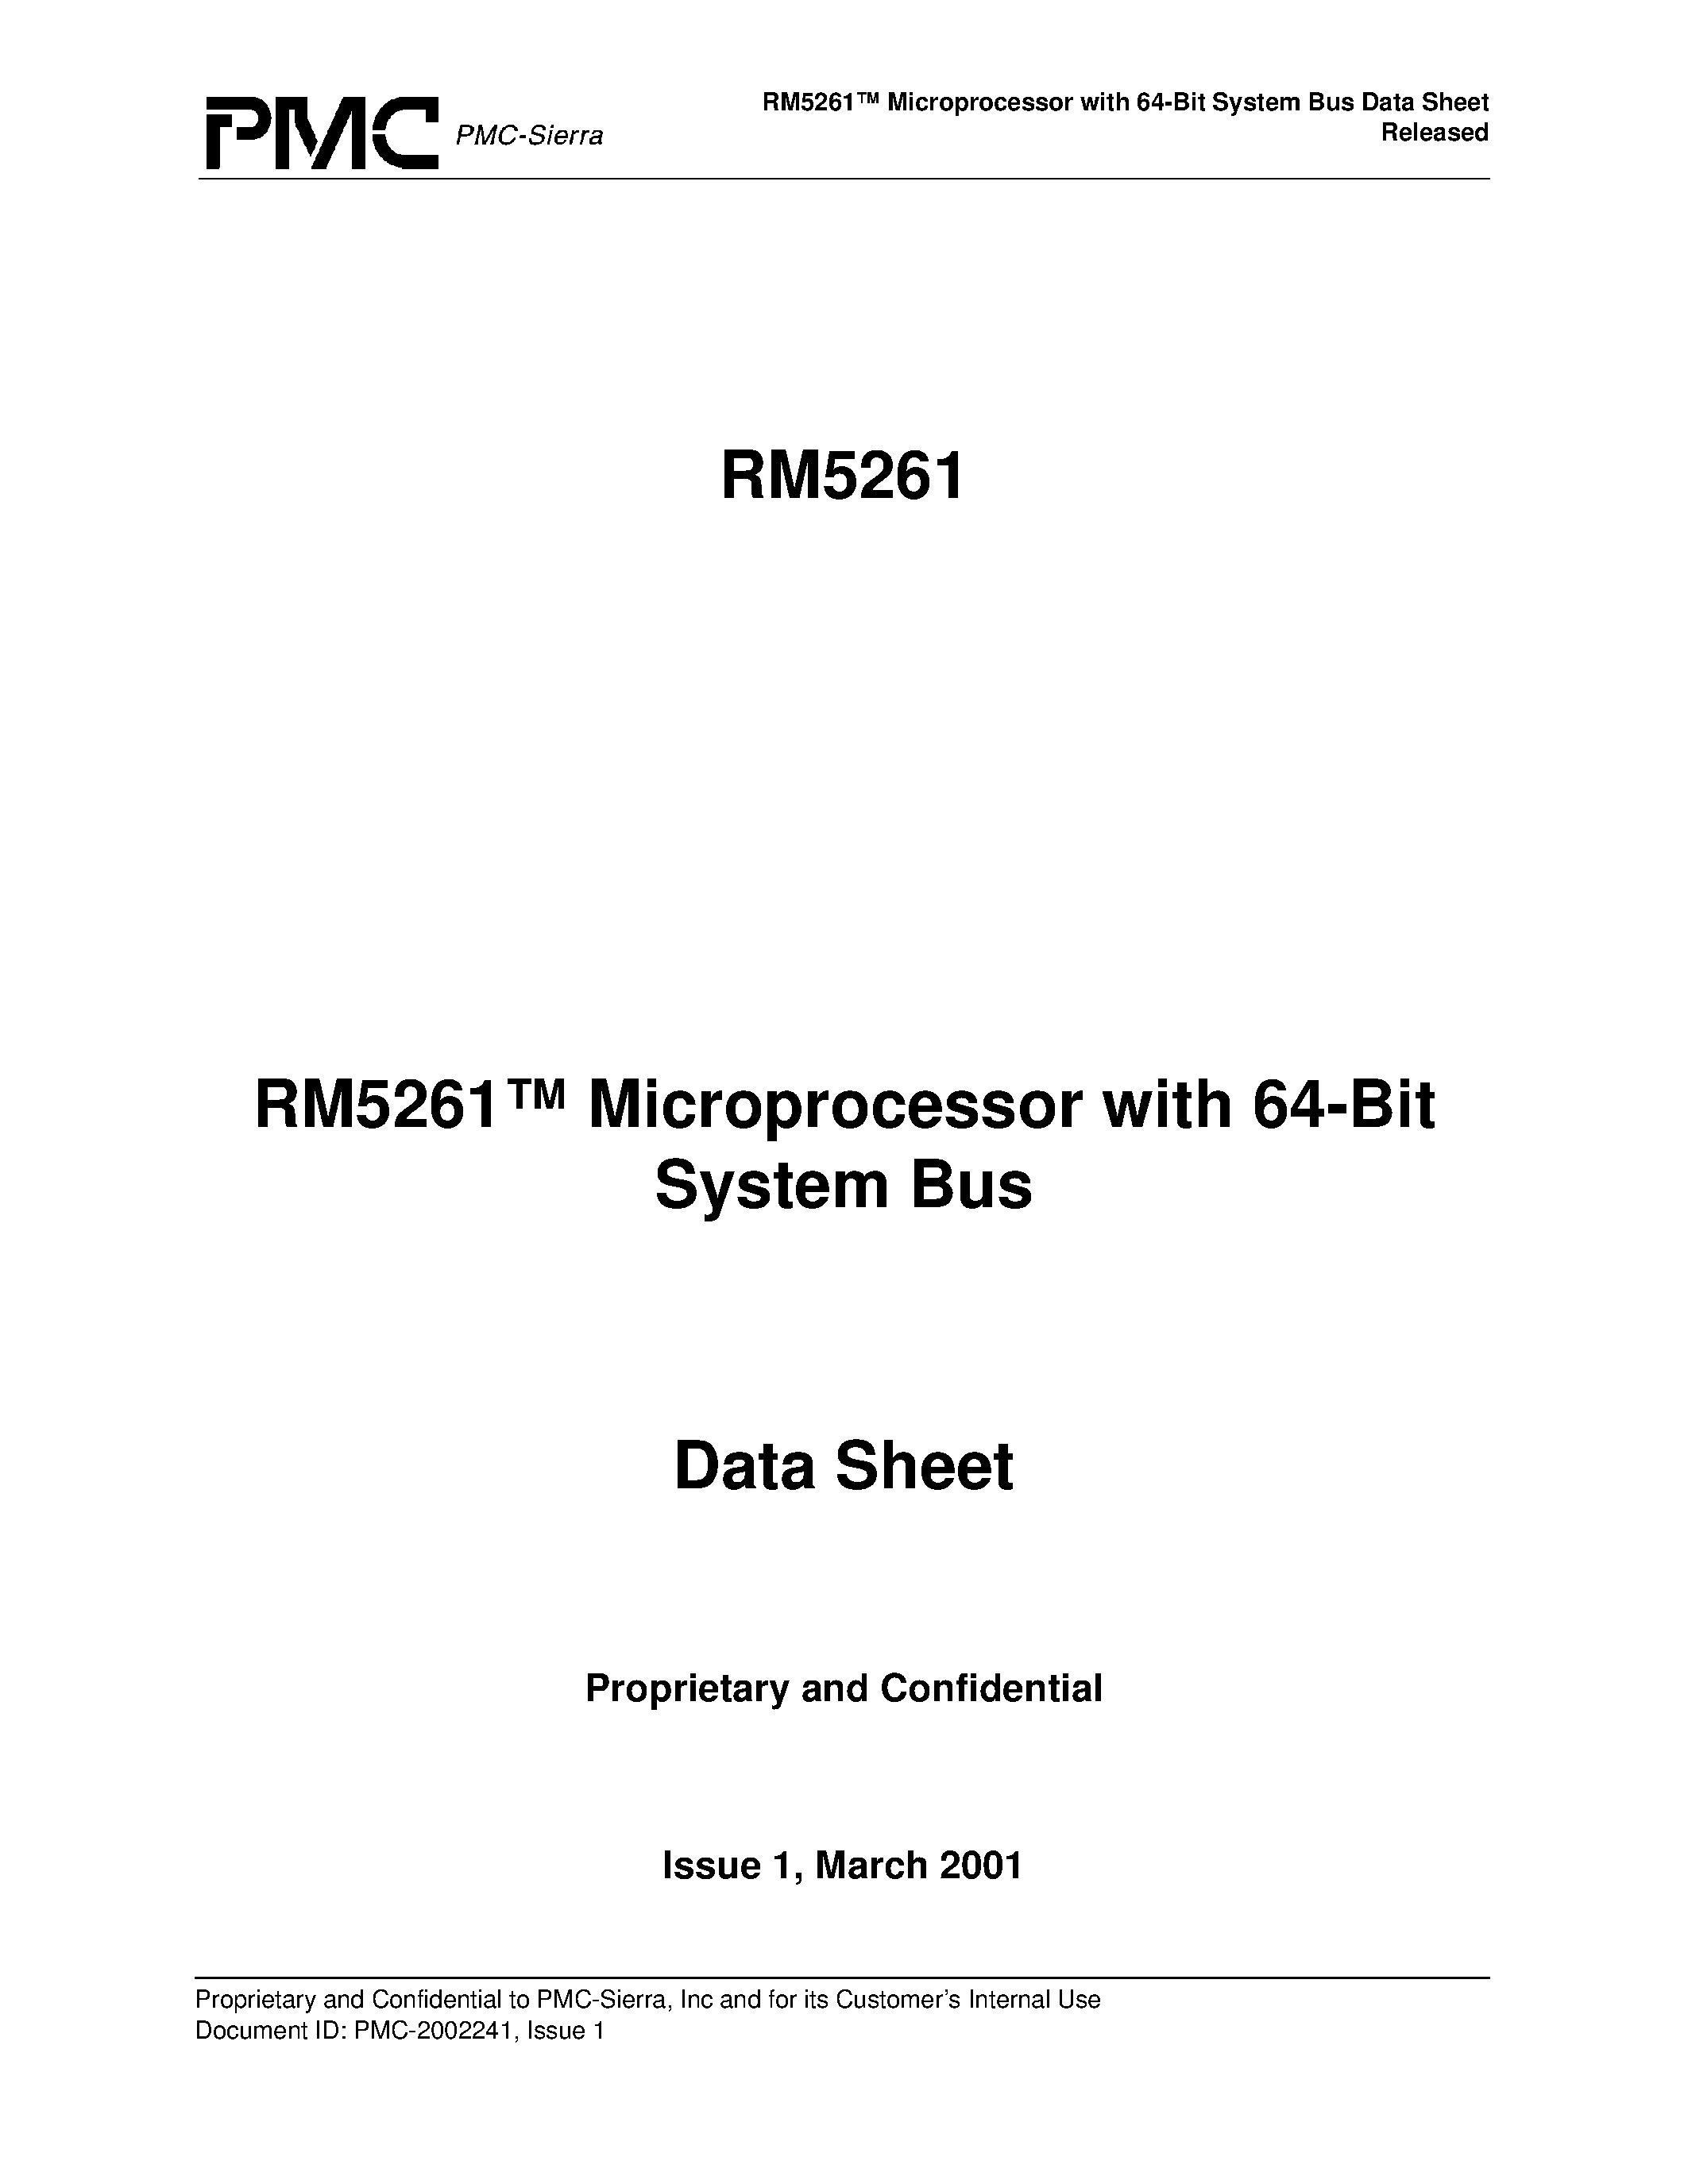 Datasheet RM5261-200-Q - RM5261 Microprocessor with 64-Bit System Bus Data Sheet Released page 1